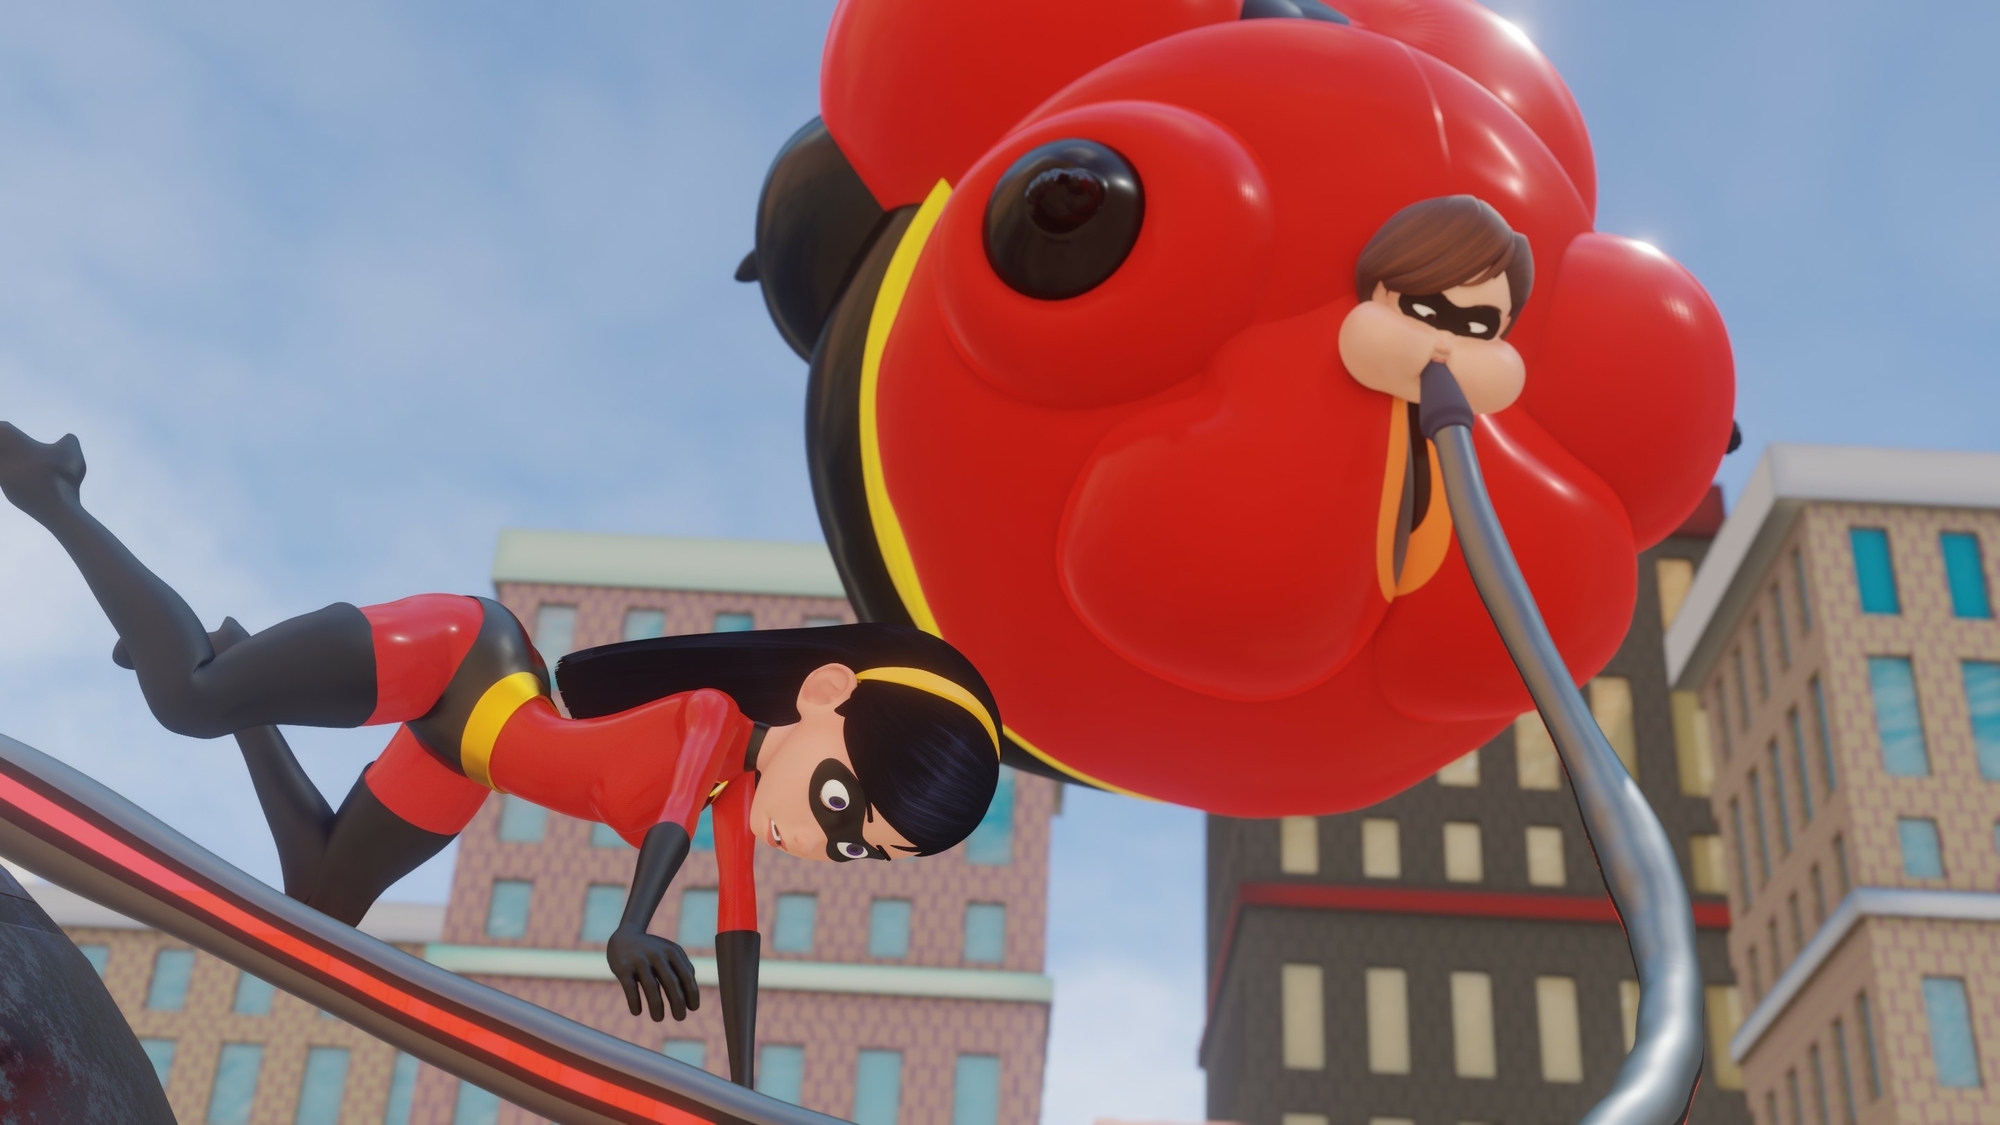 Elastigirl and Violet save the day! The Incredibles Helen Parr Inflation Fetish Breast Expansion Big Breasts Body Inflation Bbw 3